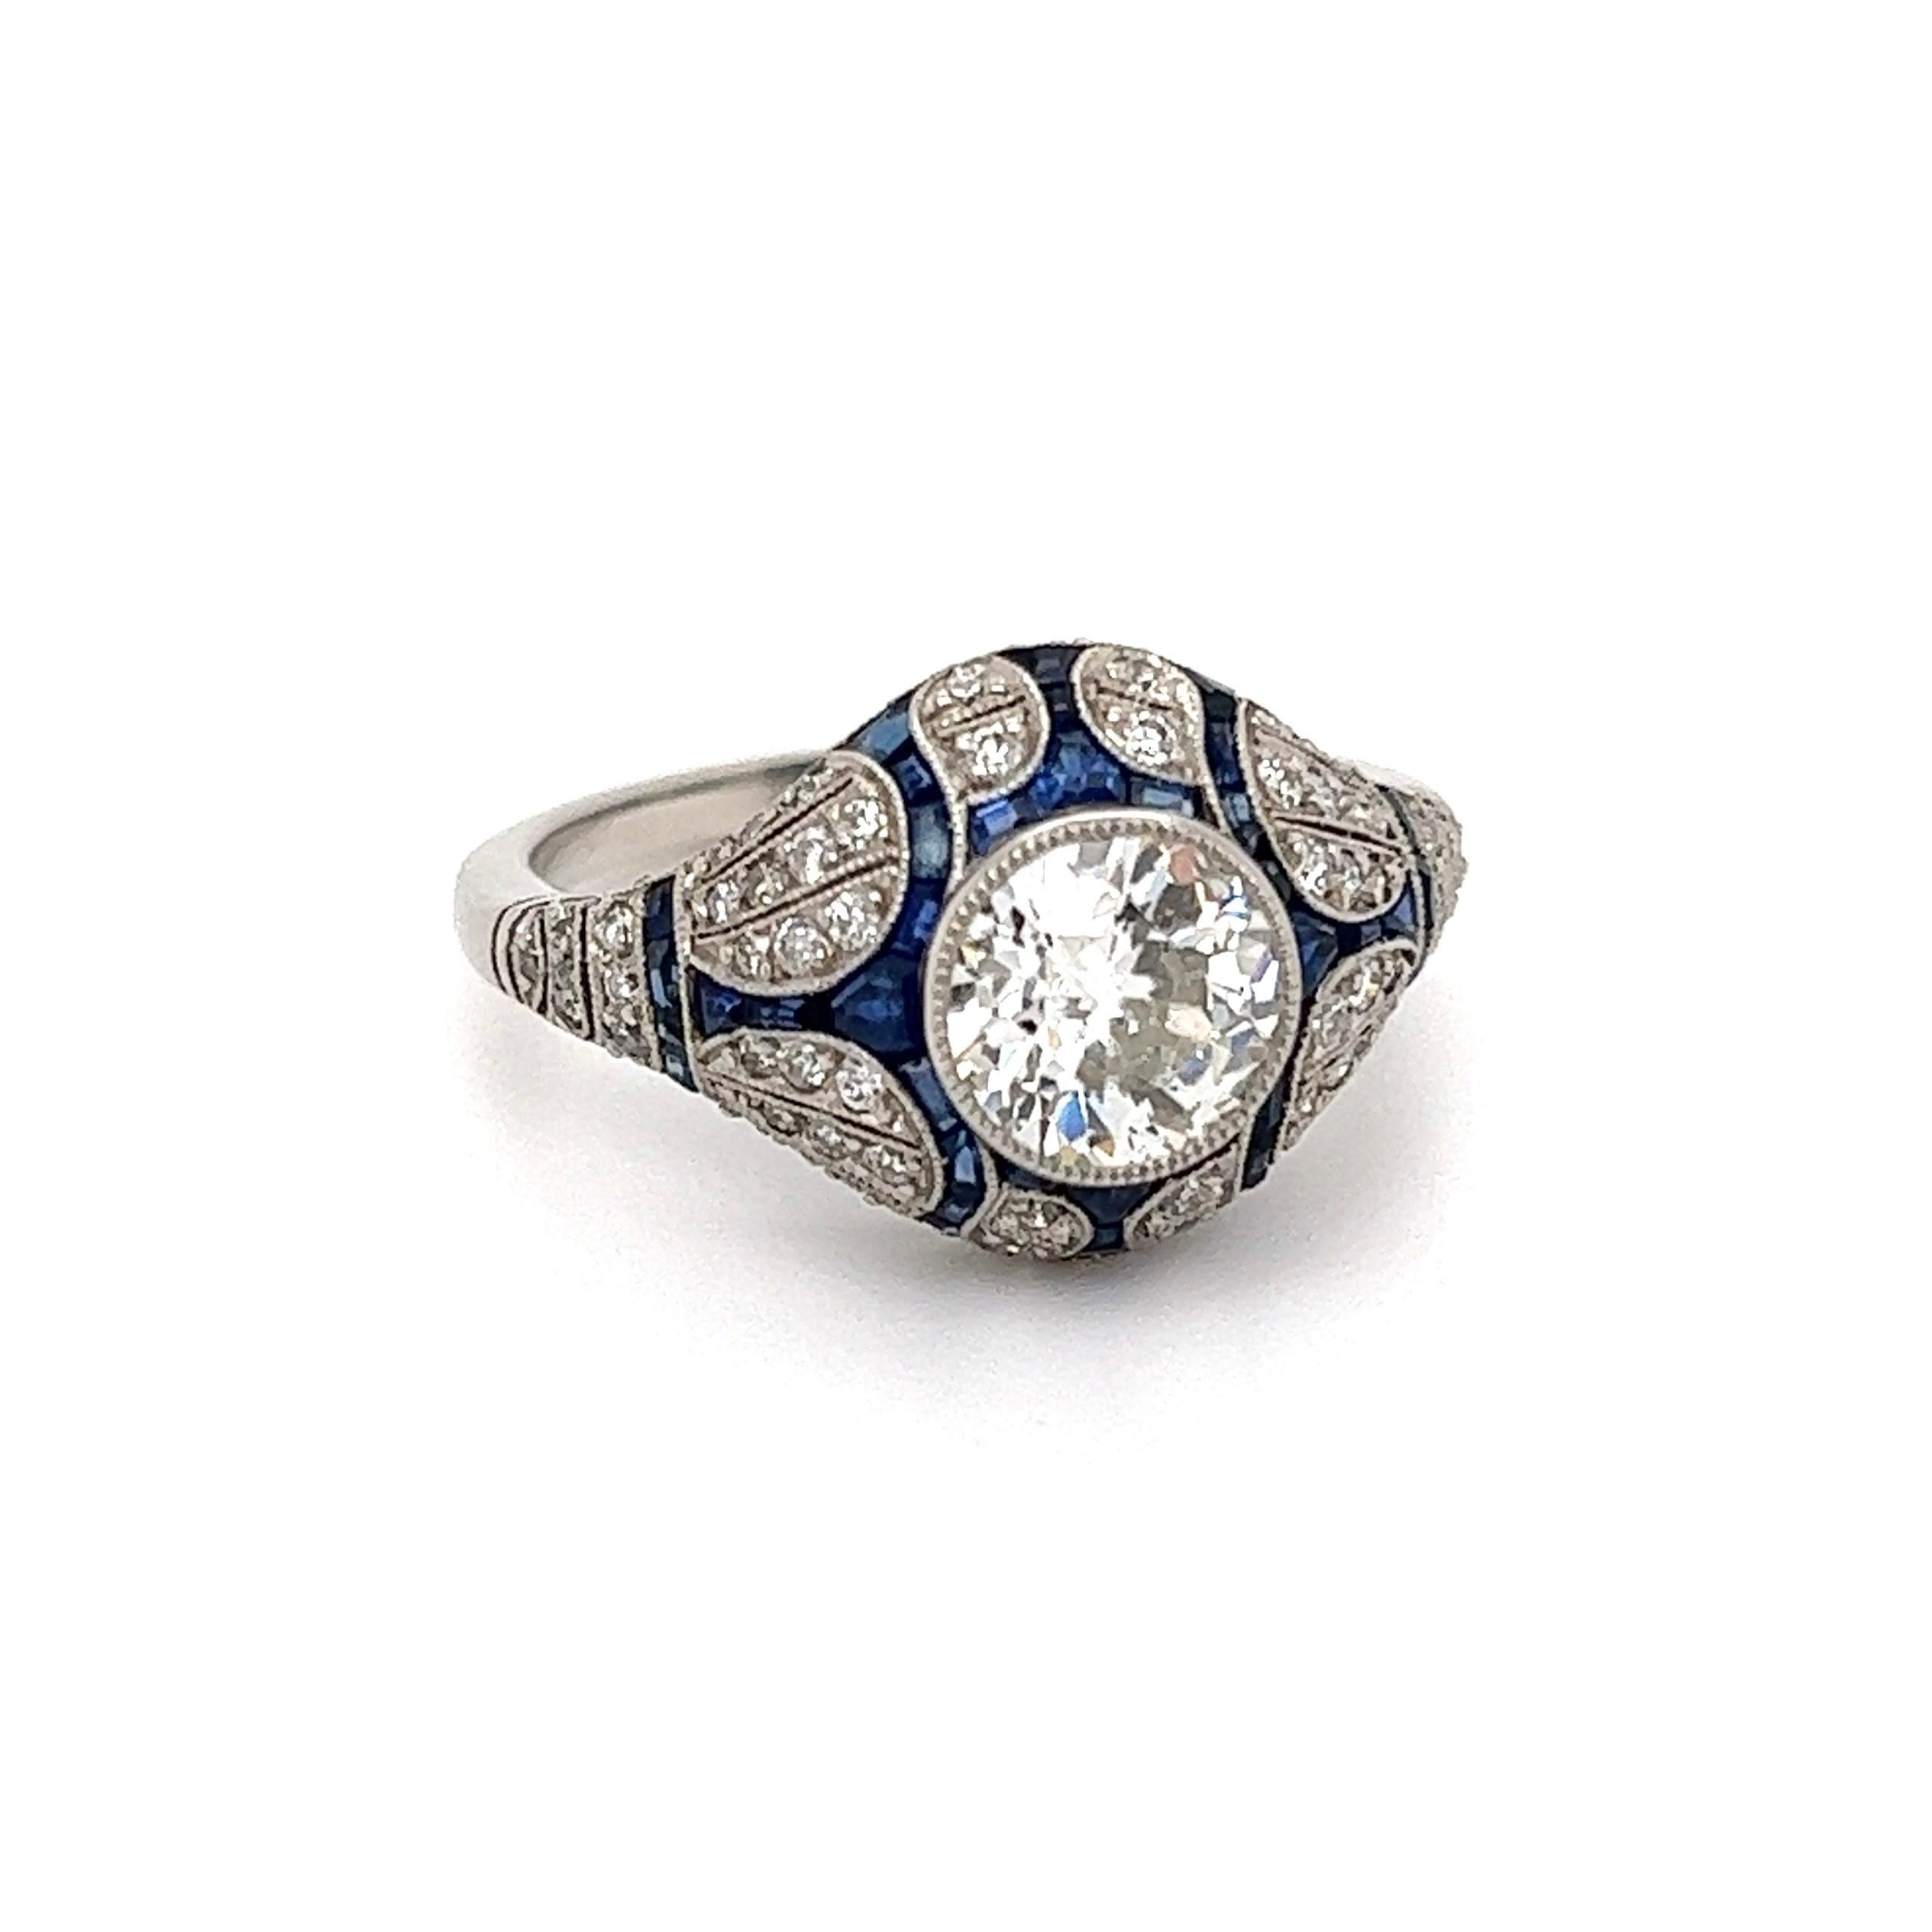 Simply Beautiful! Finely detailed Cocktail Ring, center securely Hand set with a 1.11 Carat Old European Cut Diamond, surrounded by 98 side diamonds weighing approx. 1.00tcw and accented by Sapphires weighing approx. 1.76tcw. Hand crafted Platinum